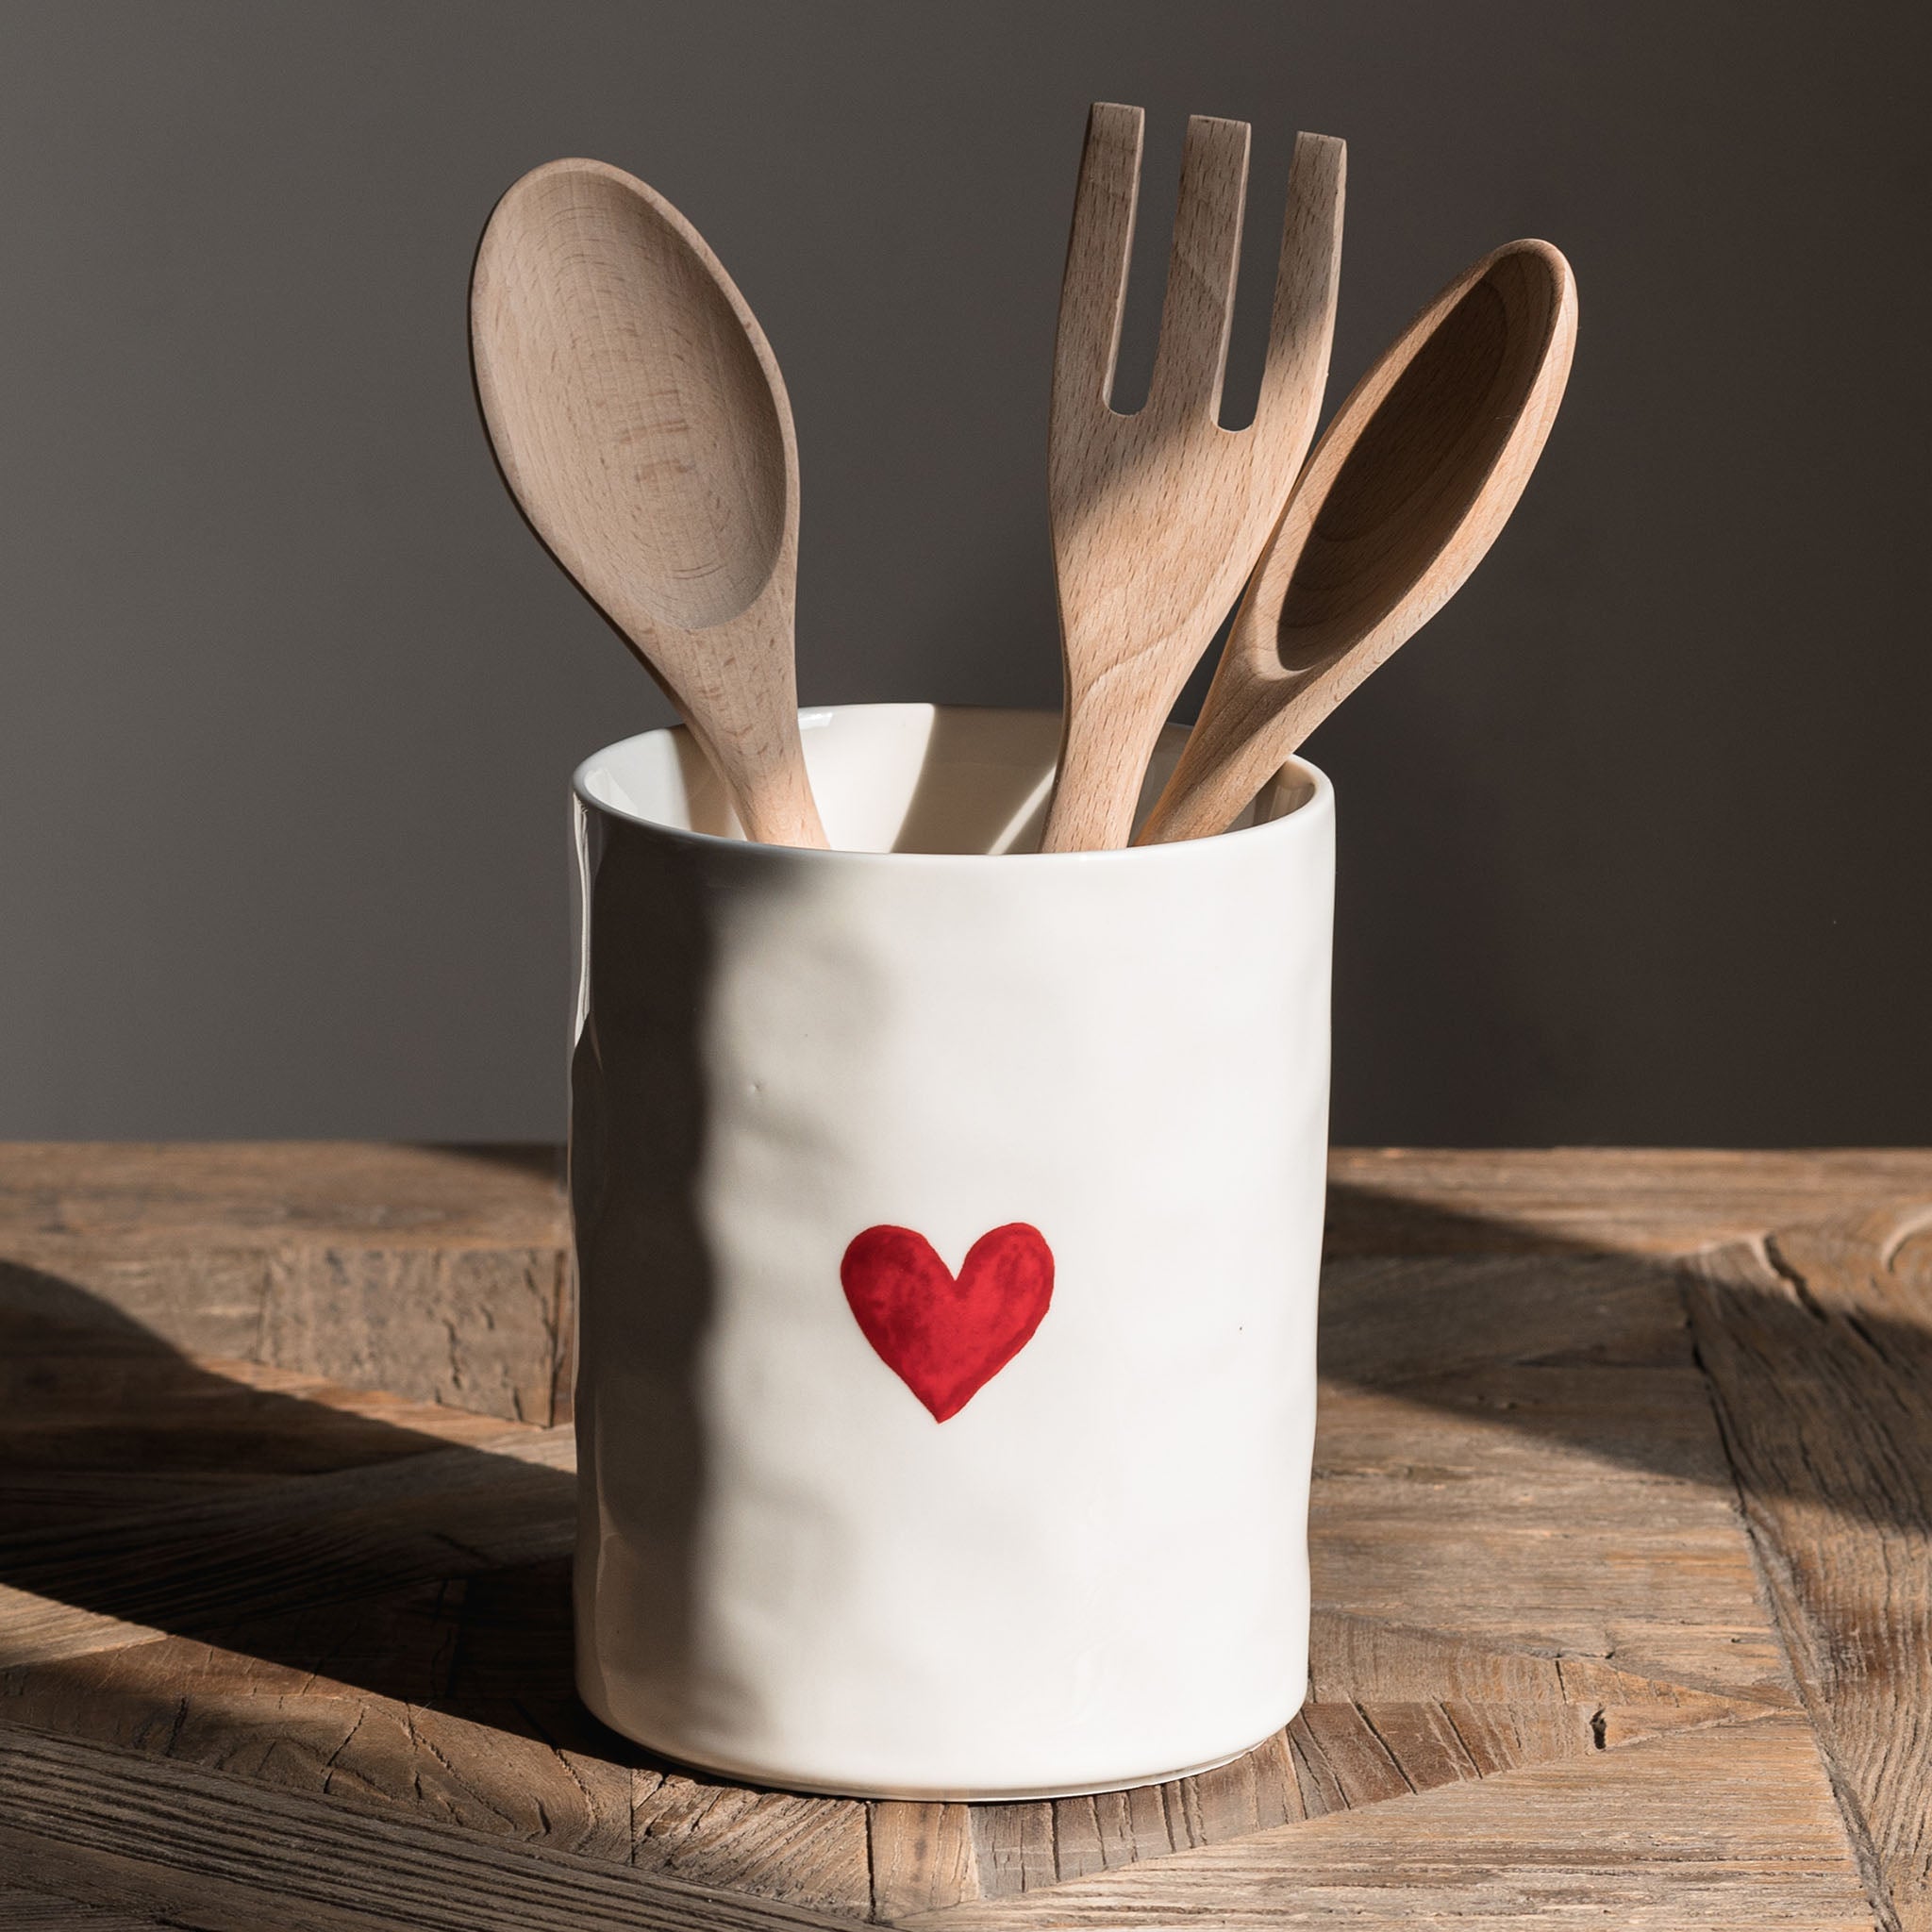 Red Heart cutlery holder